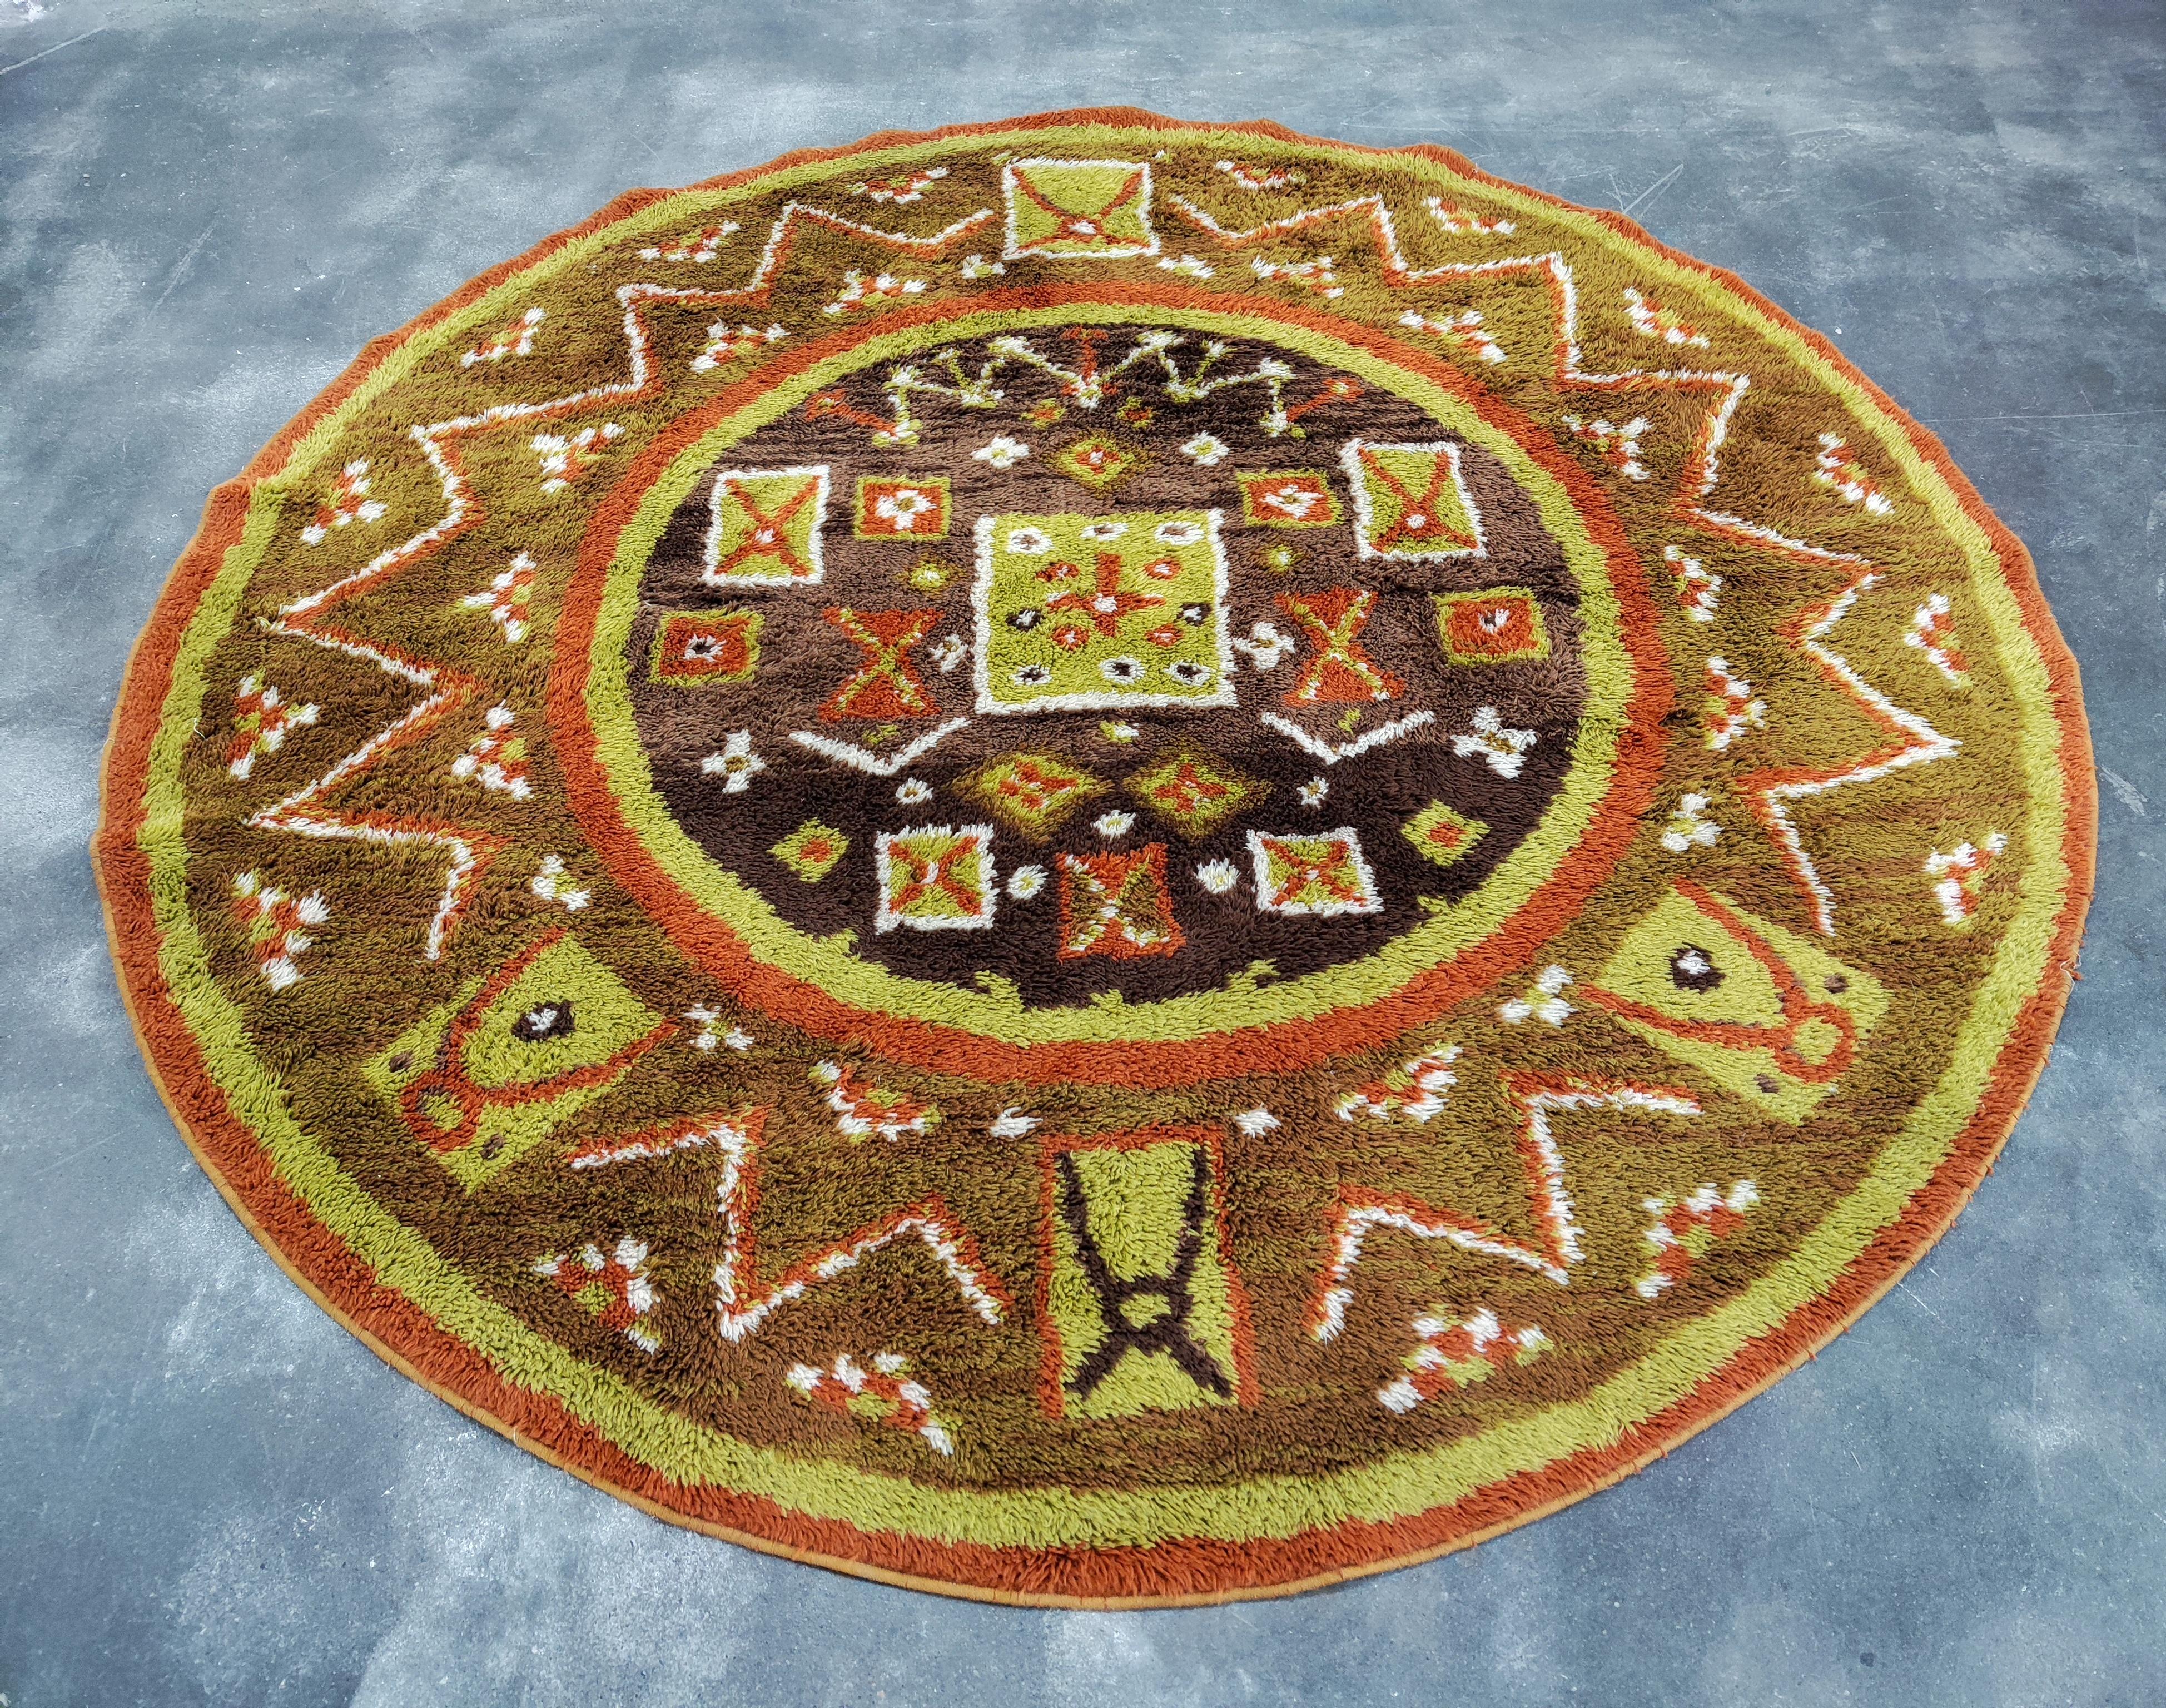 In this listing you will find a round Mid-Century Modern area rug, featuring traditional Nordic symbols. The rug was manufactured by Teppich Siegel, large German rug manufacturer of the time. The rug is called FINLANDIA, which can be seen on the